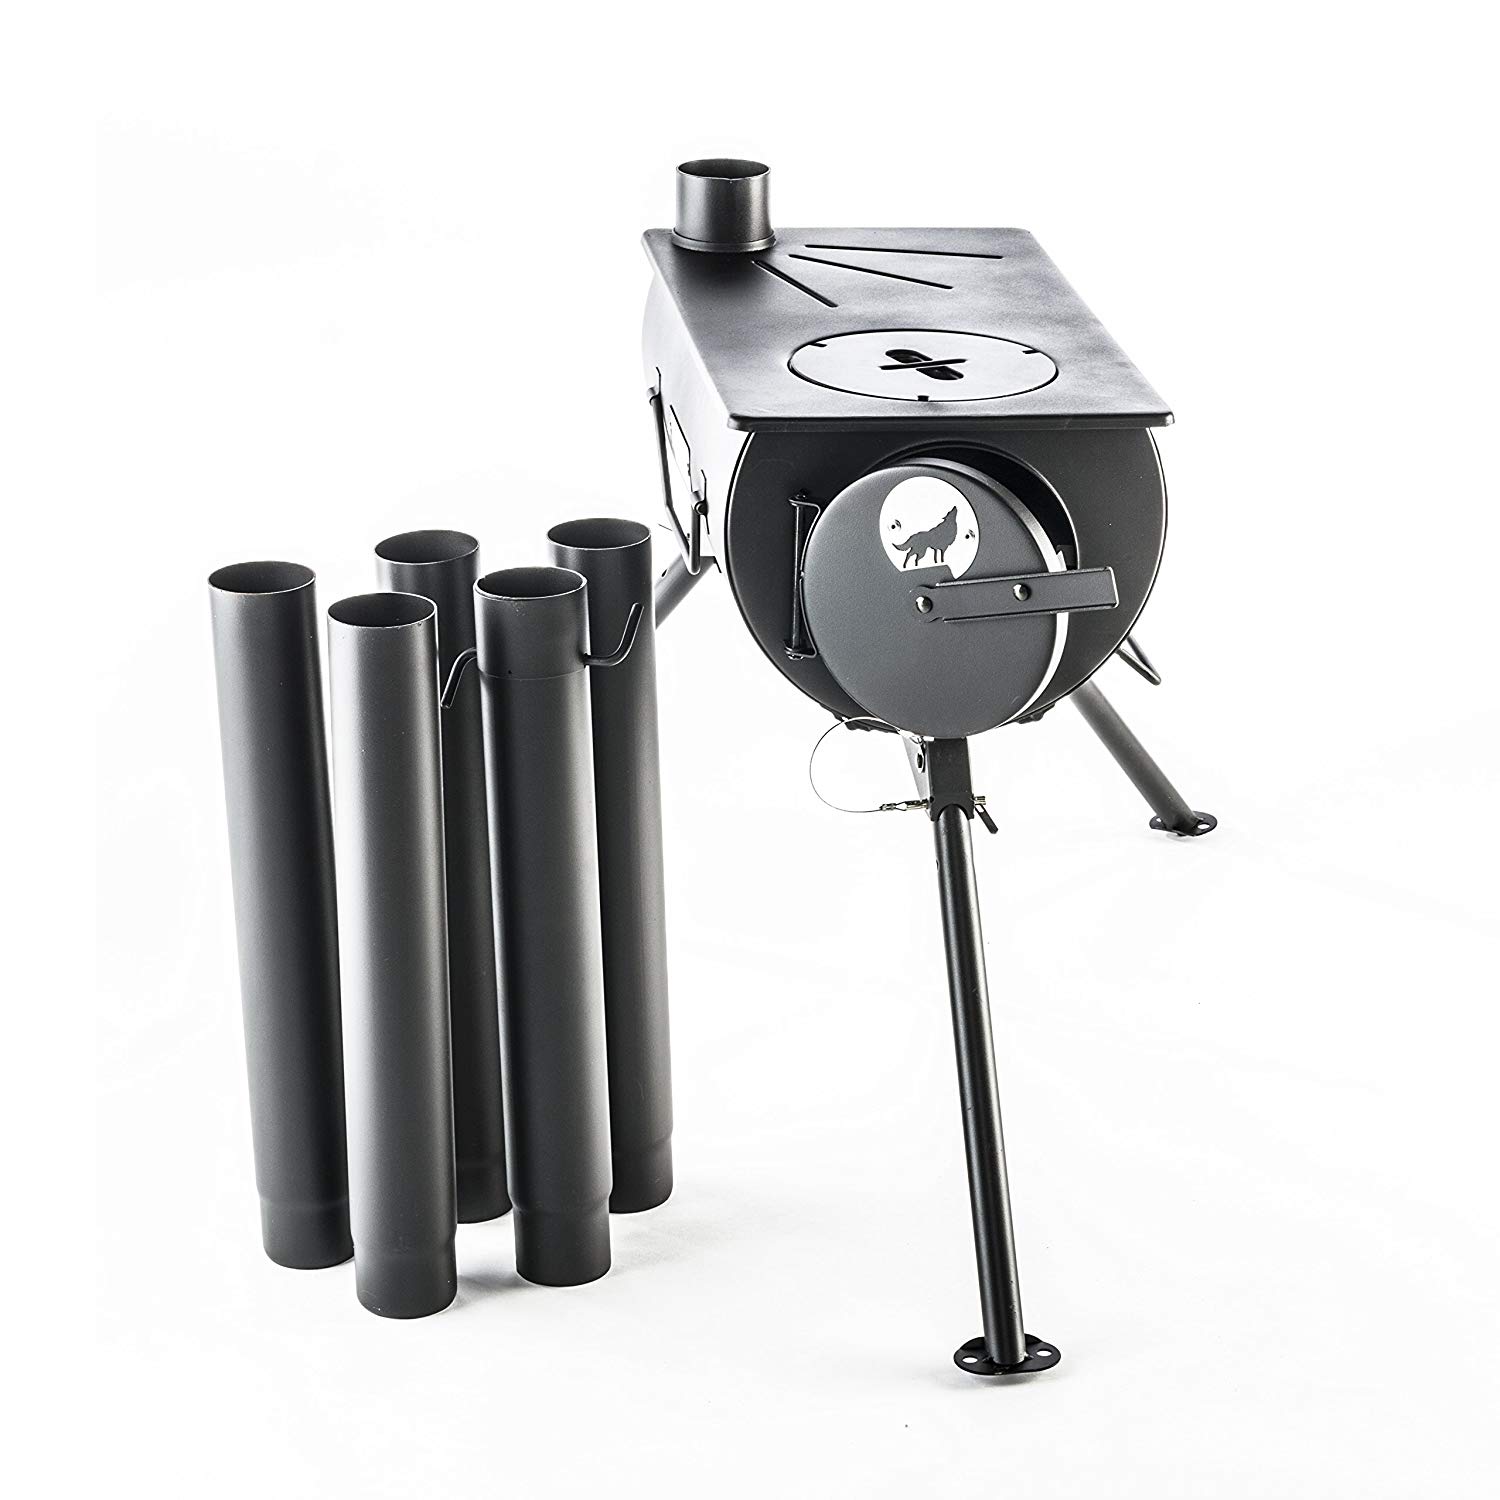 Anevay Frontier Stove with flue pipes